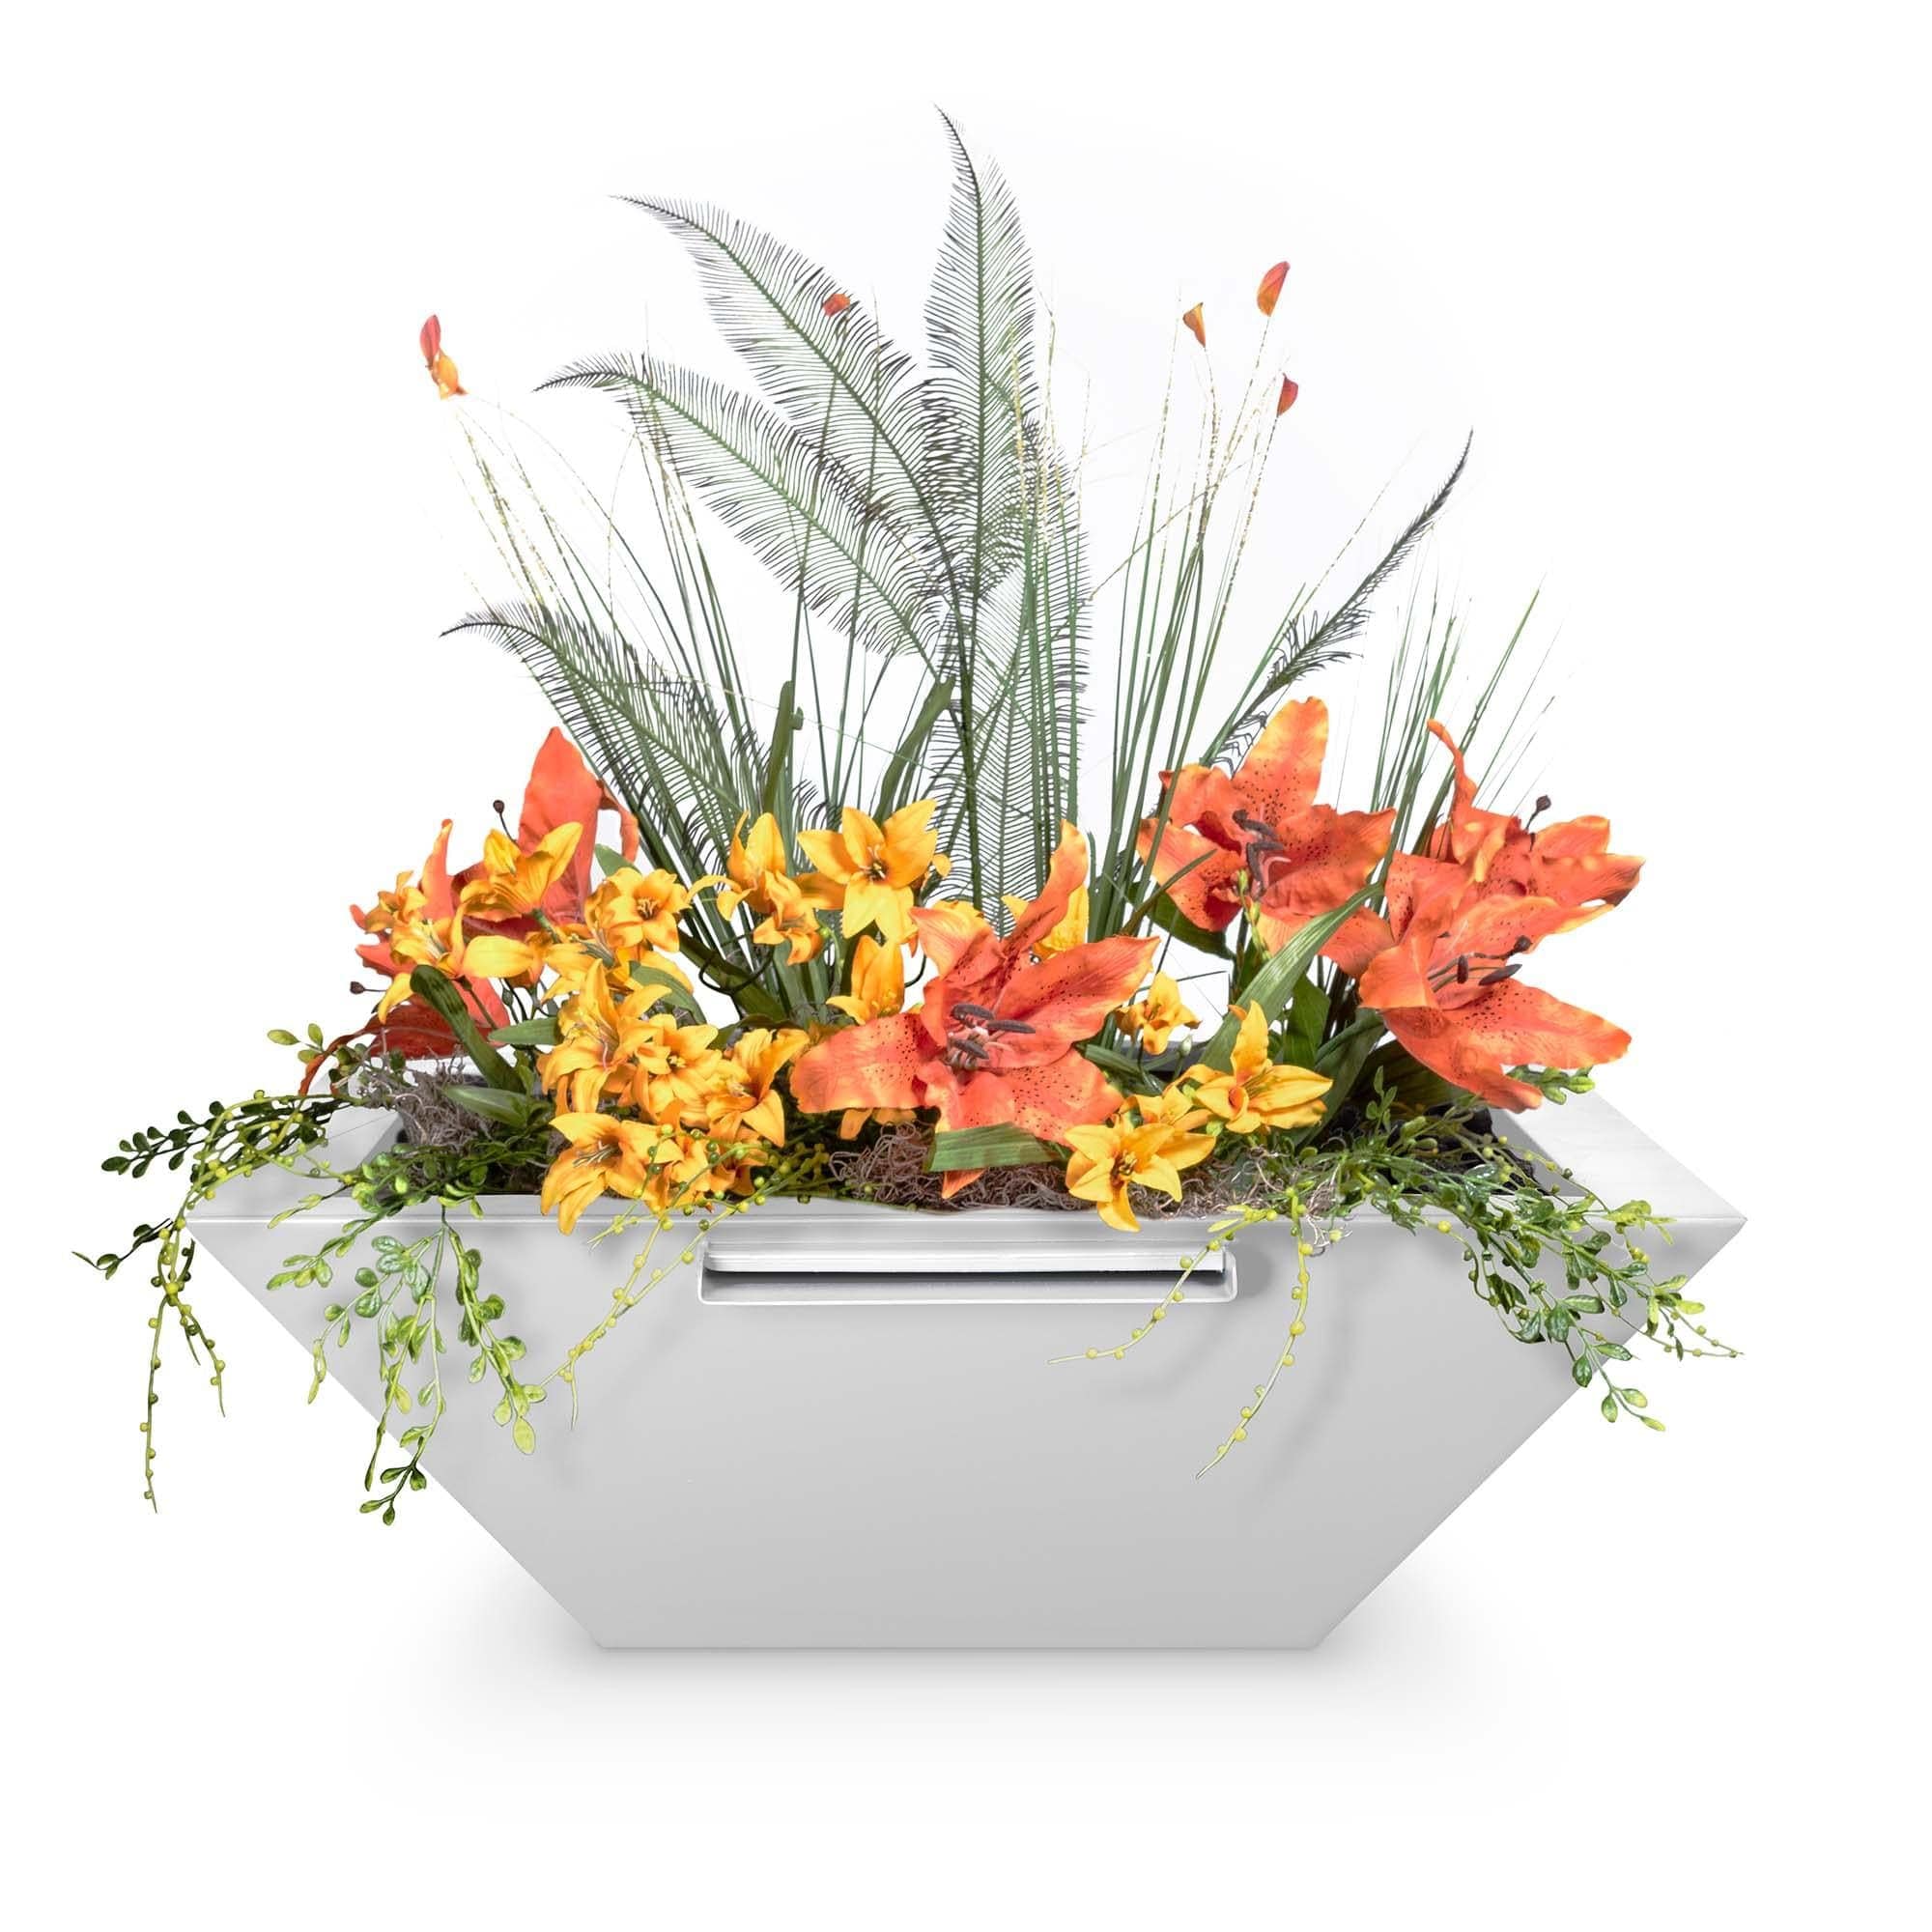 The Outdoor Plus Maya Planter and Water Bowl - Metals